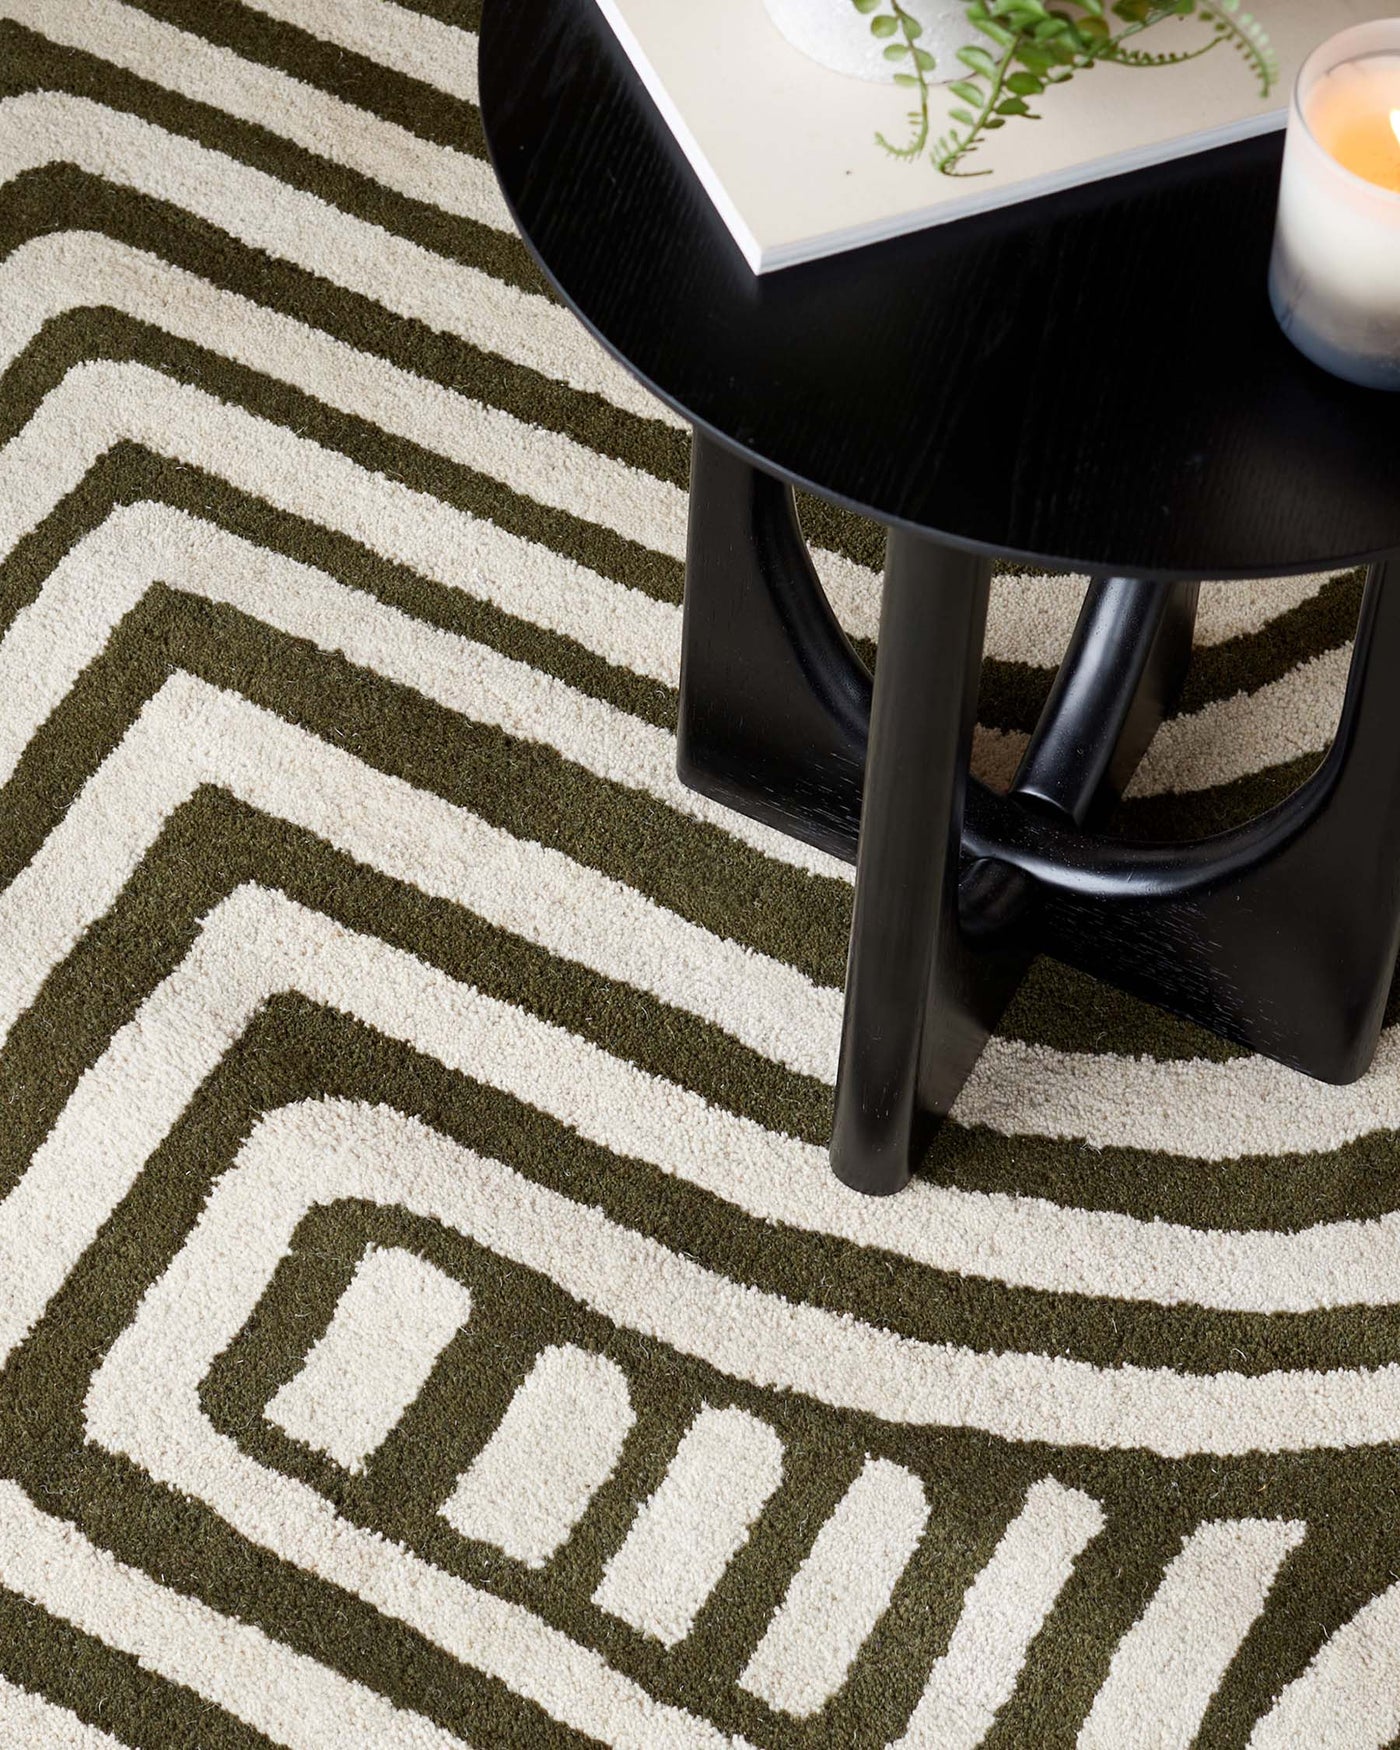 A contemporary black round side table with sleek legs, displayed on a geometric patterned area rug with green and cream stripes. The table holds a book and a small candle.